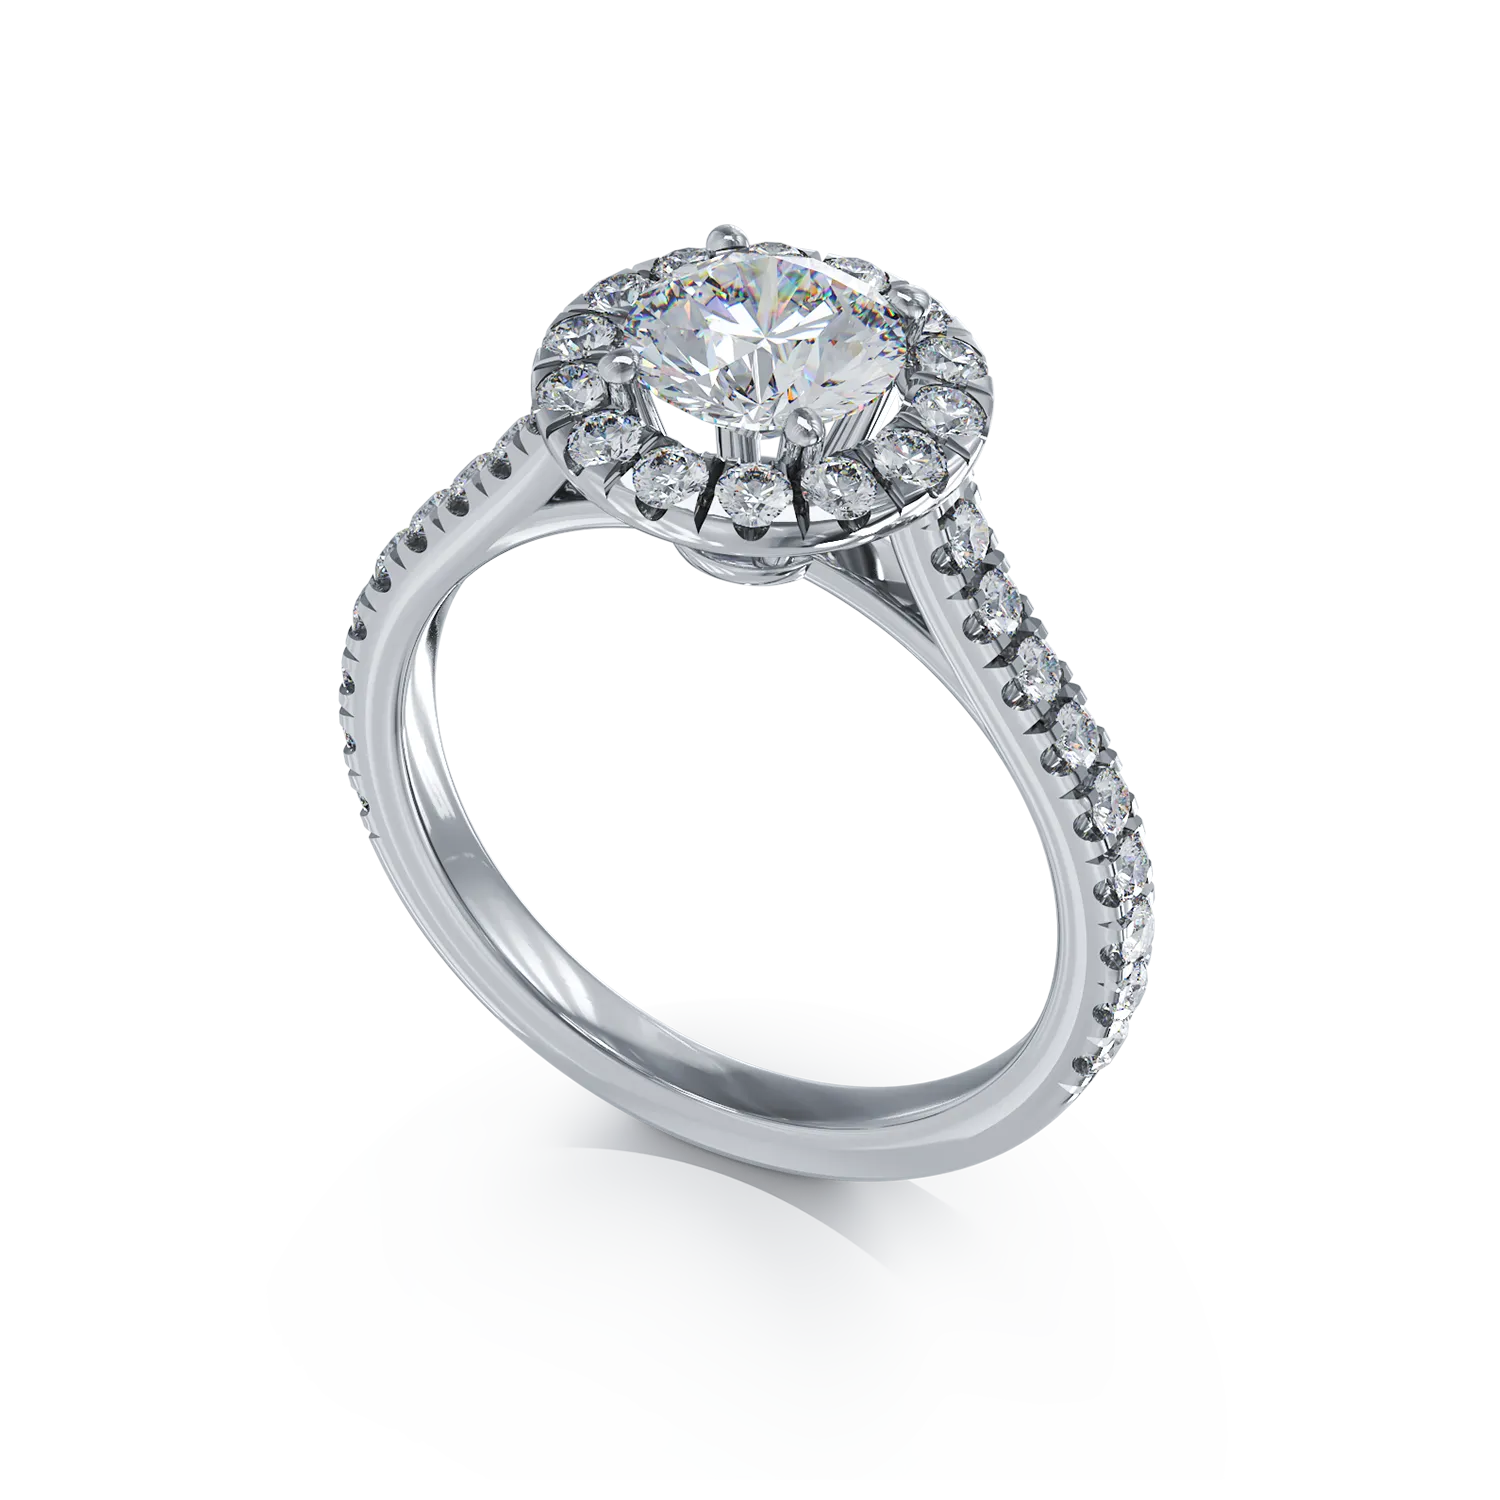 White gold engagement ring with 0.9ct diamond and 0.75ct diamonds